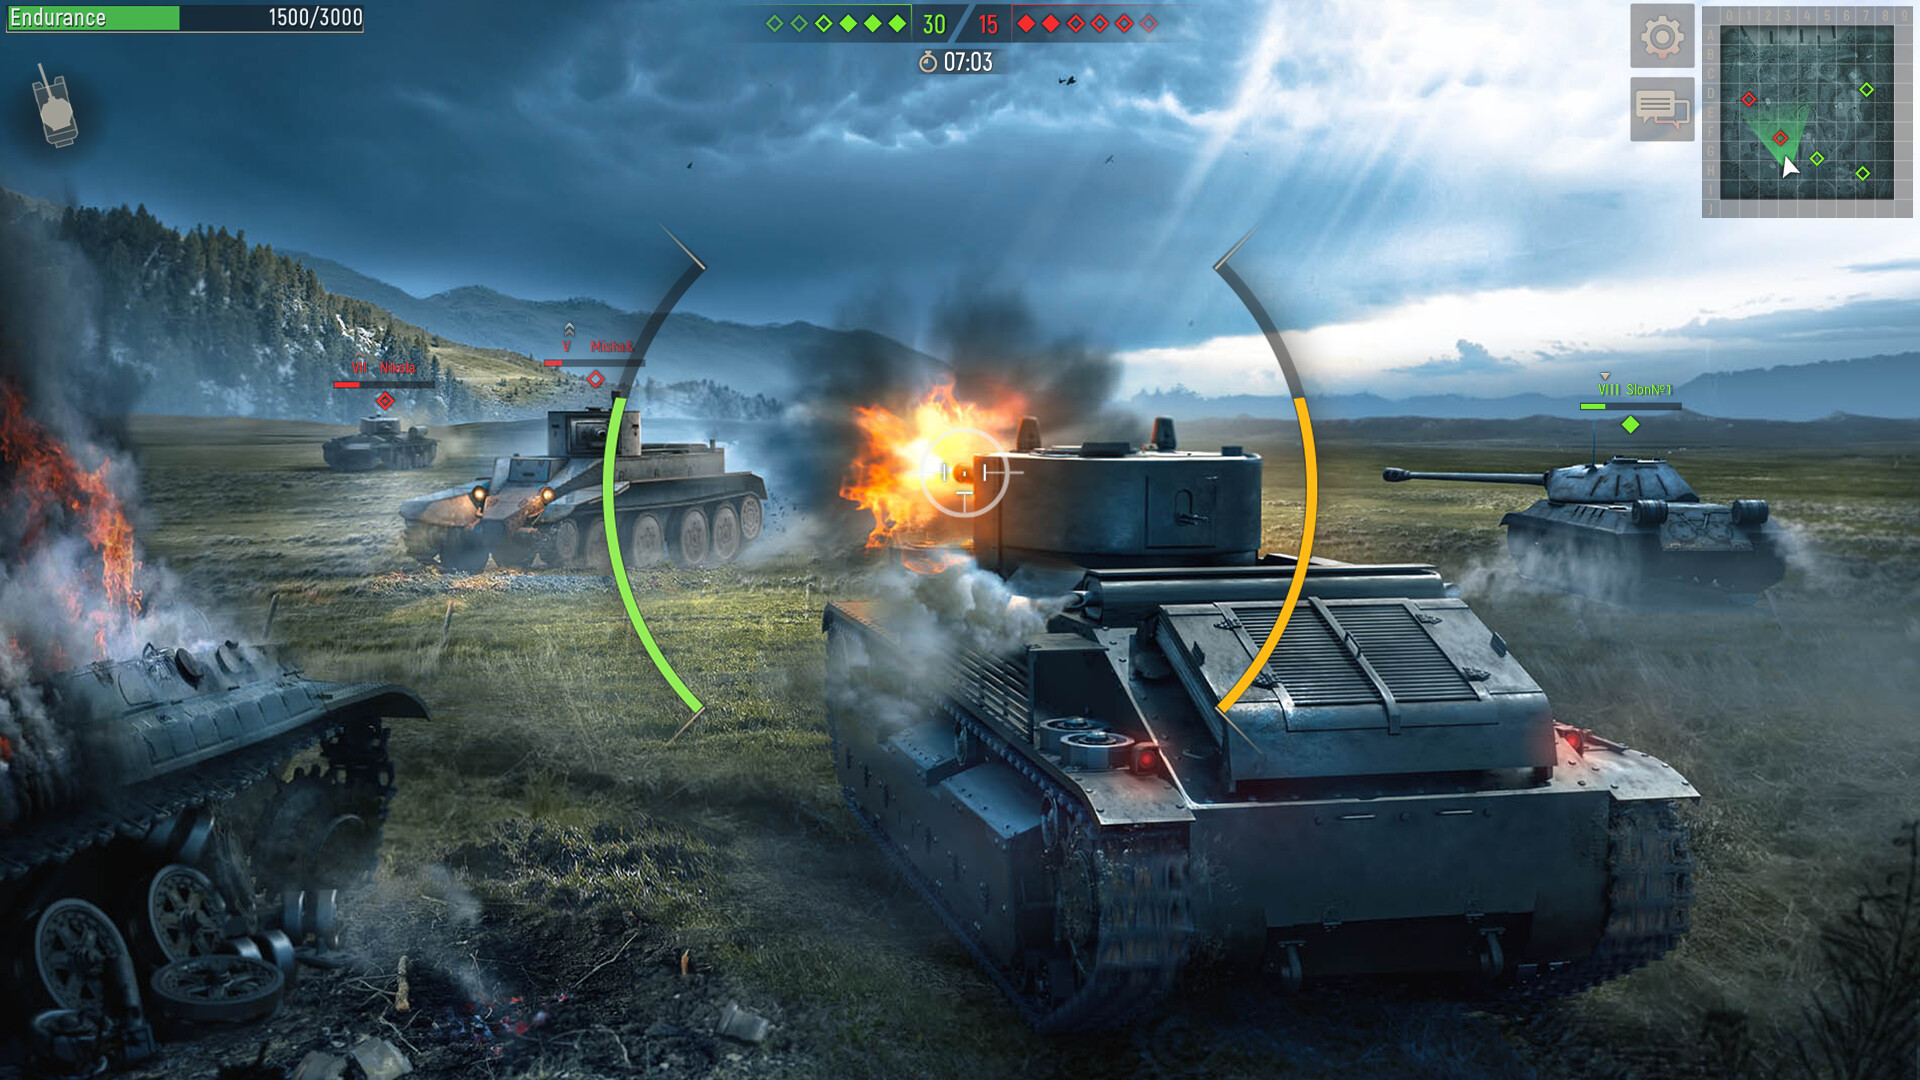 Iron Tanks: War Games Online - Apps on Google Play